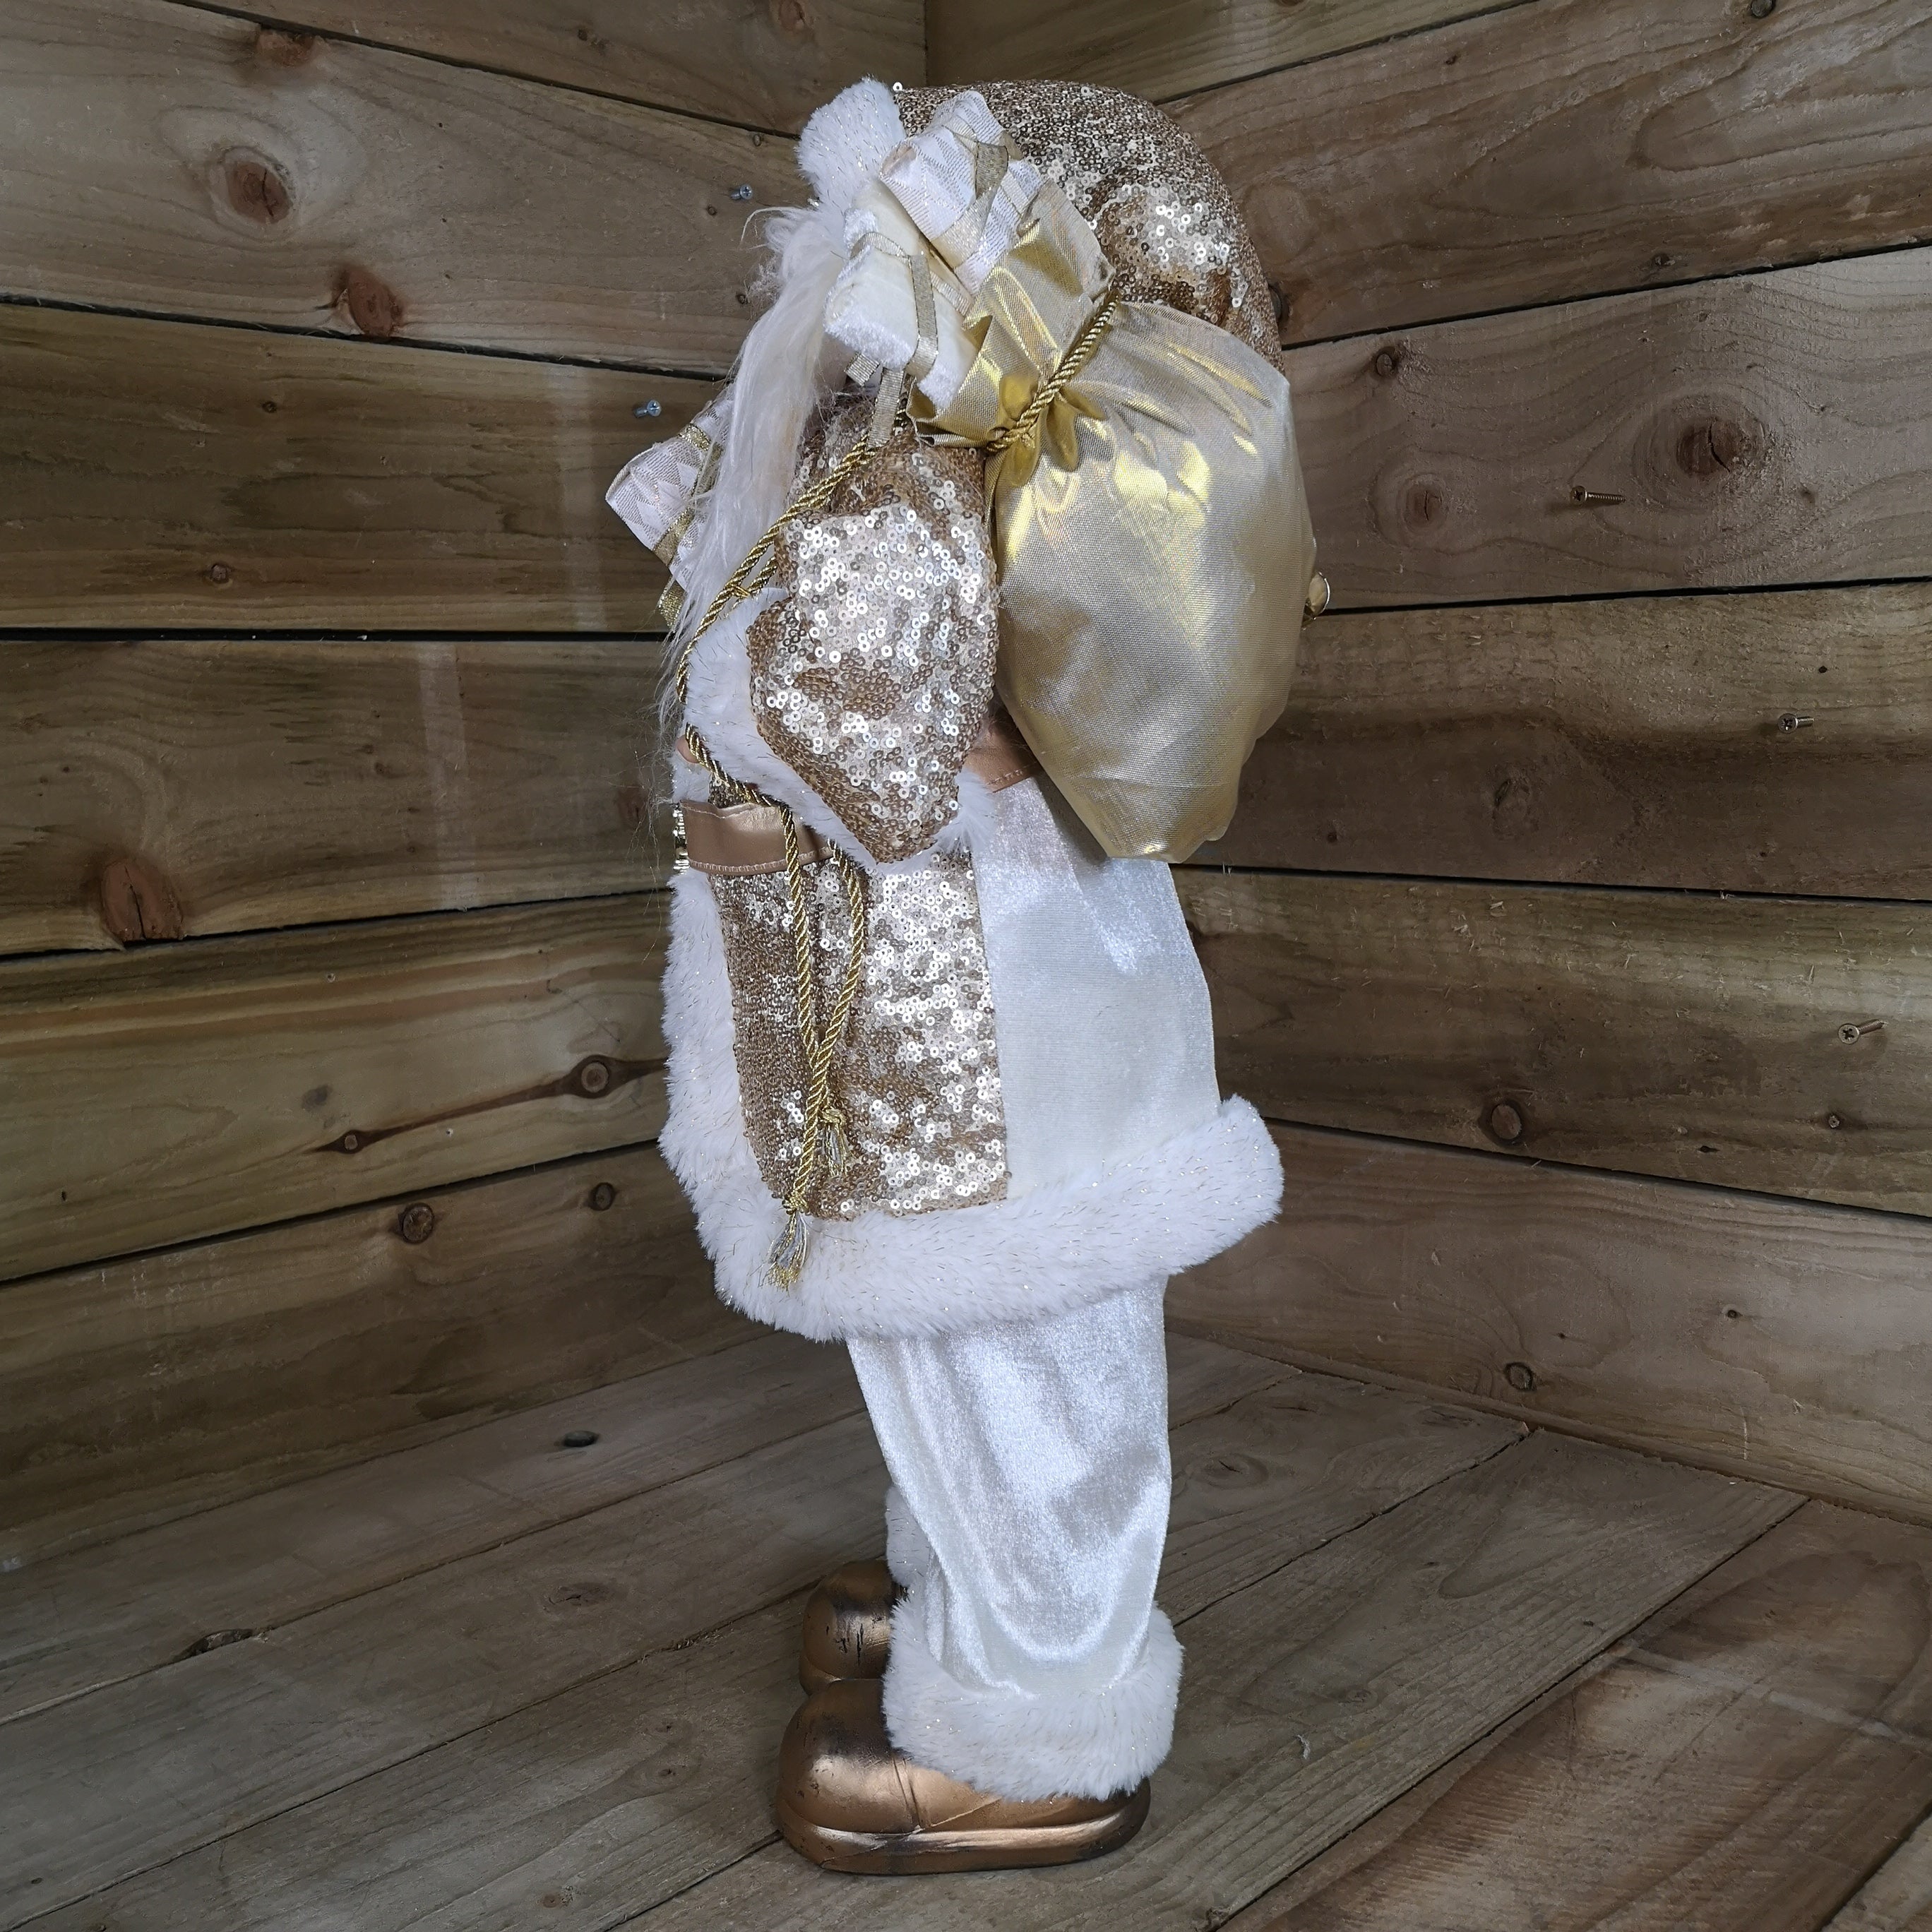 60cm Standing Santa Christmas Decoration in White and Gold Suit with Gifts